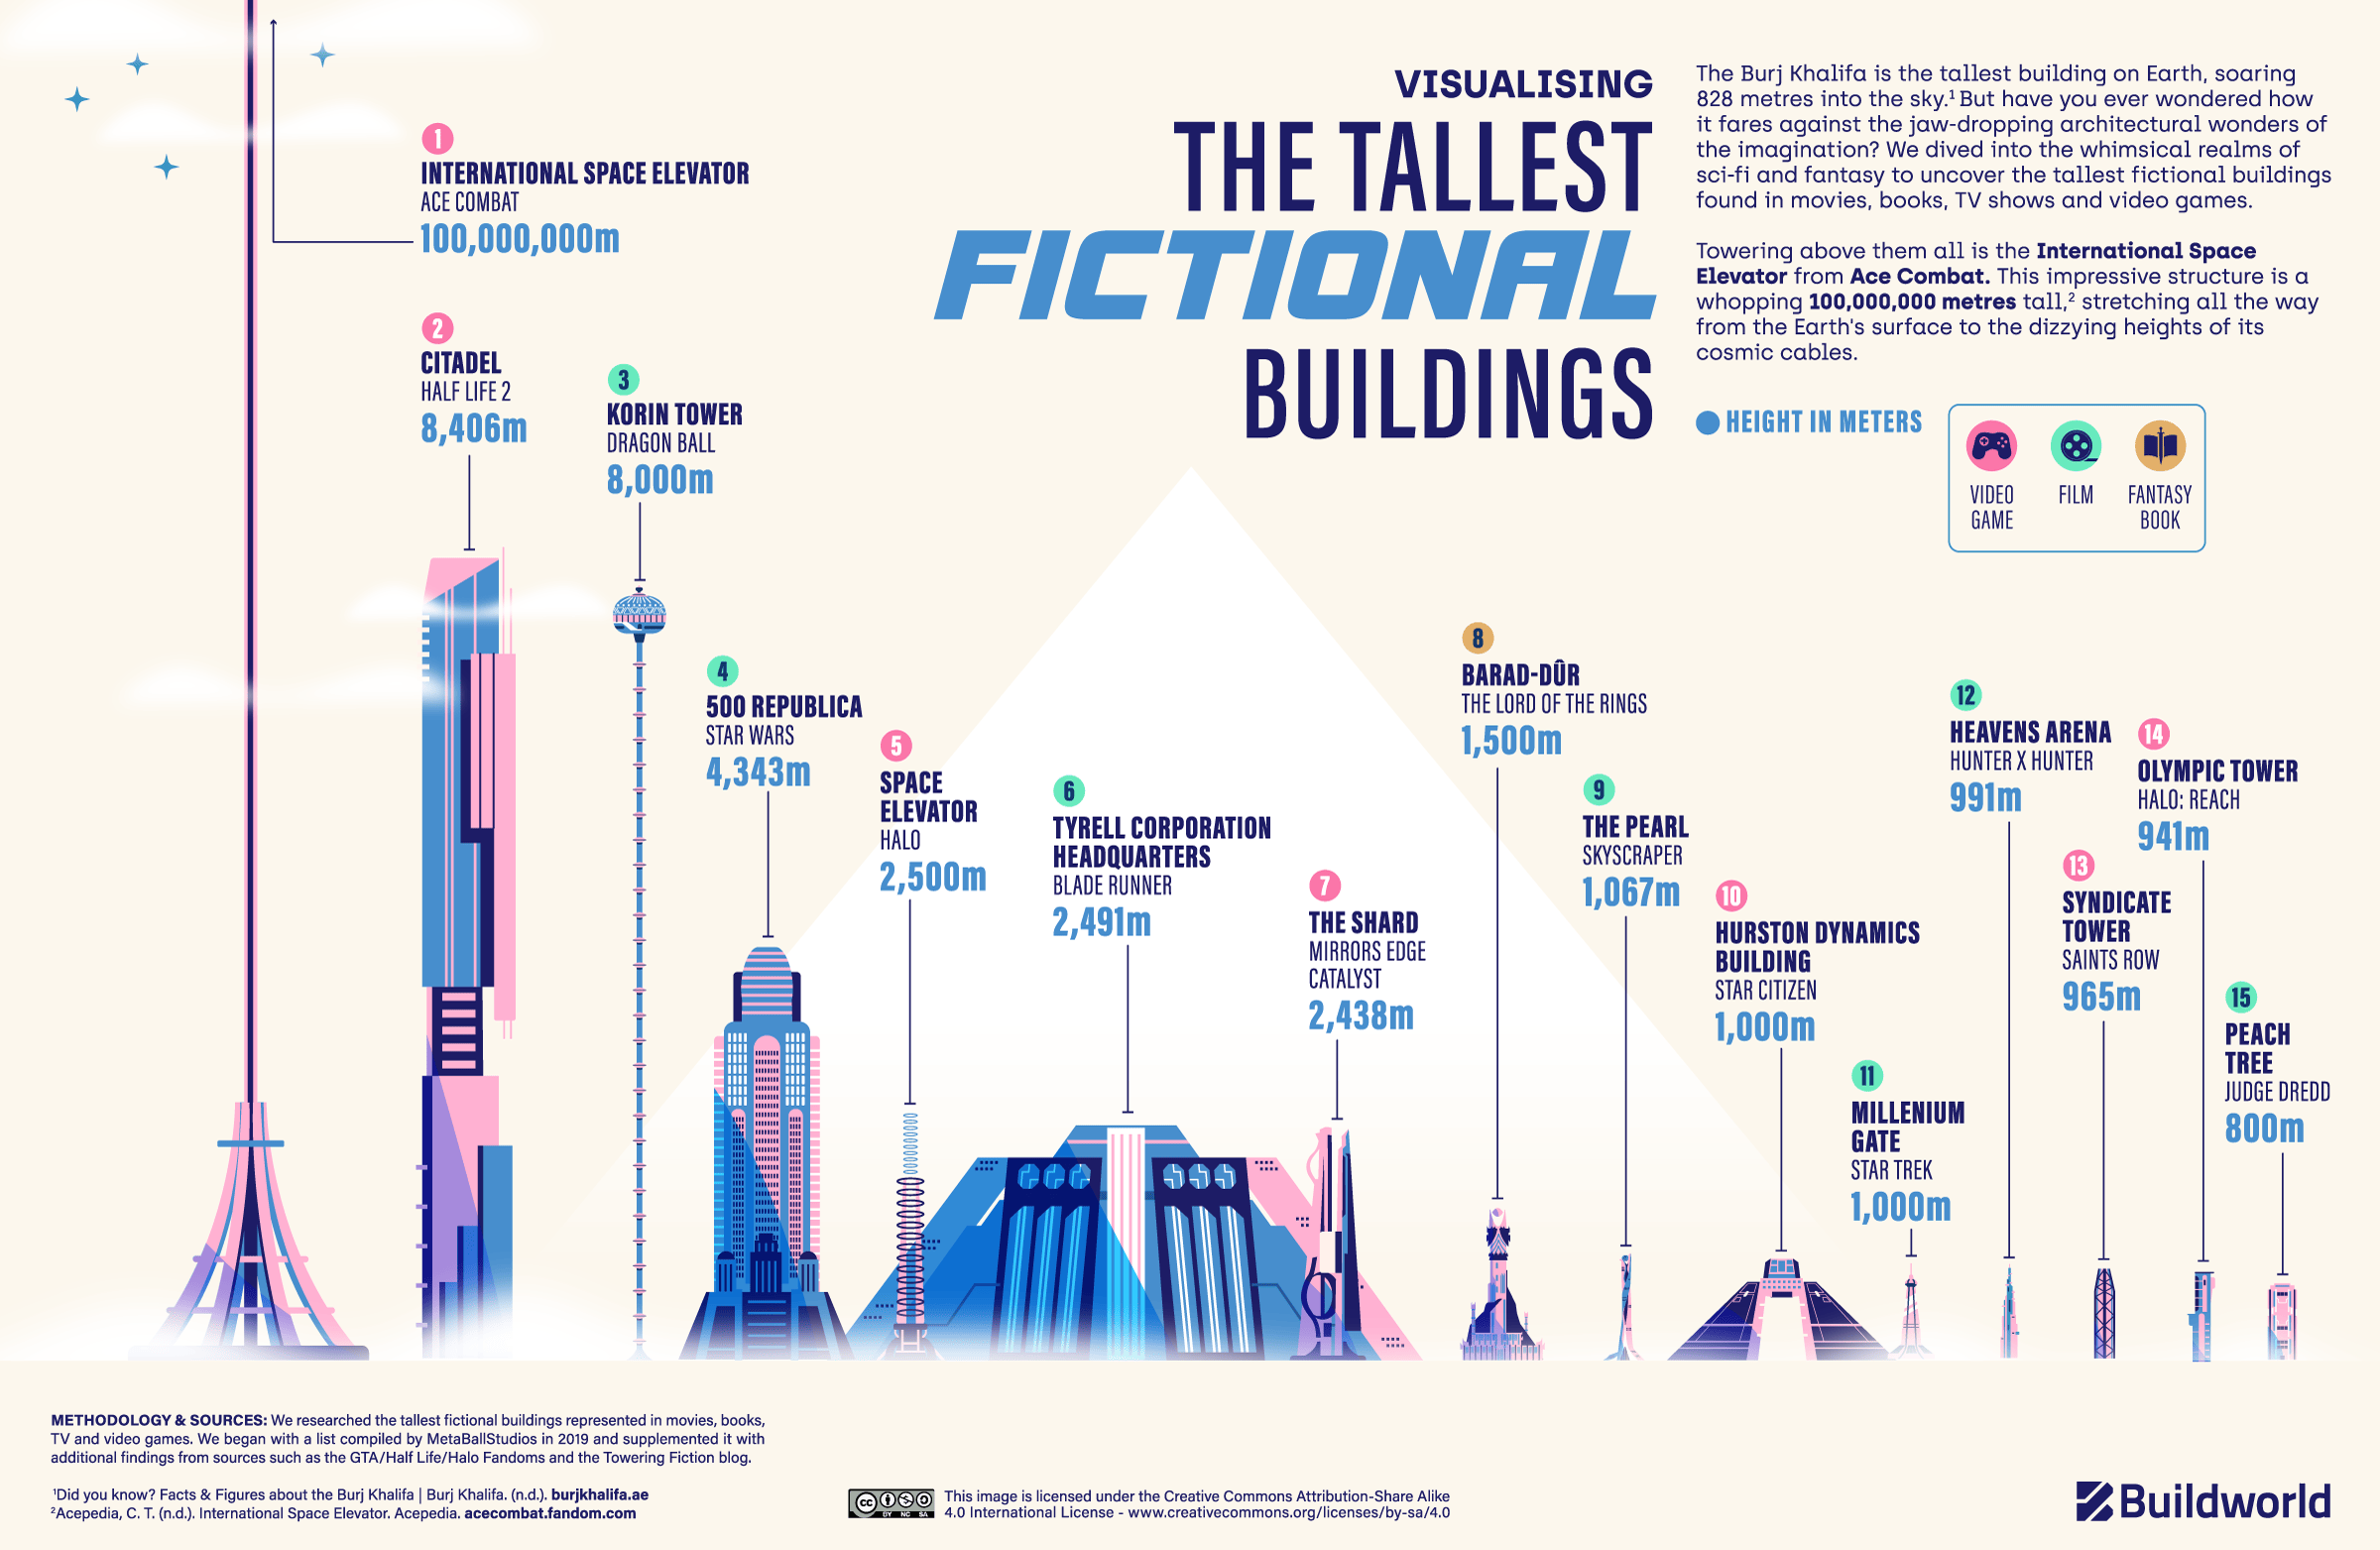 The tallest fictional buildings visualised